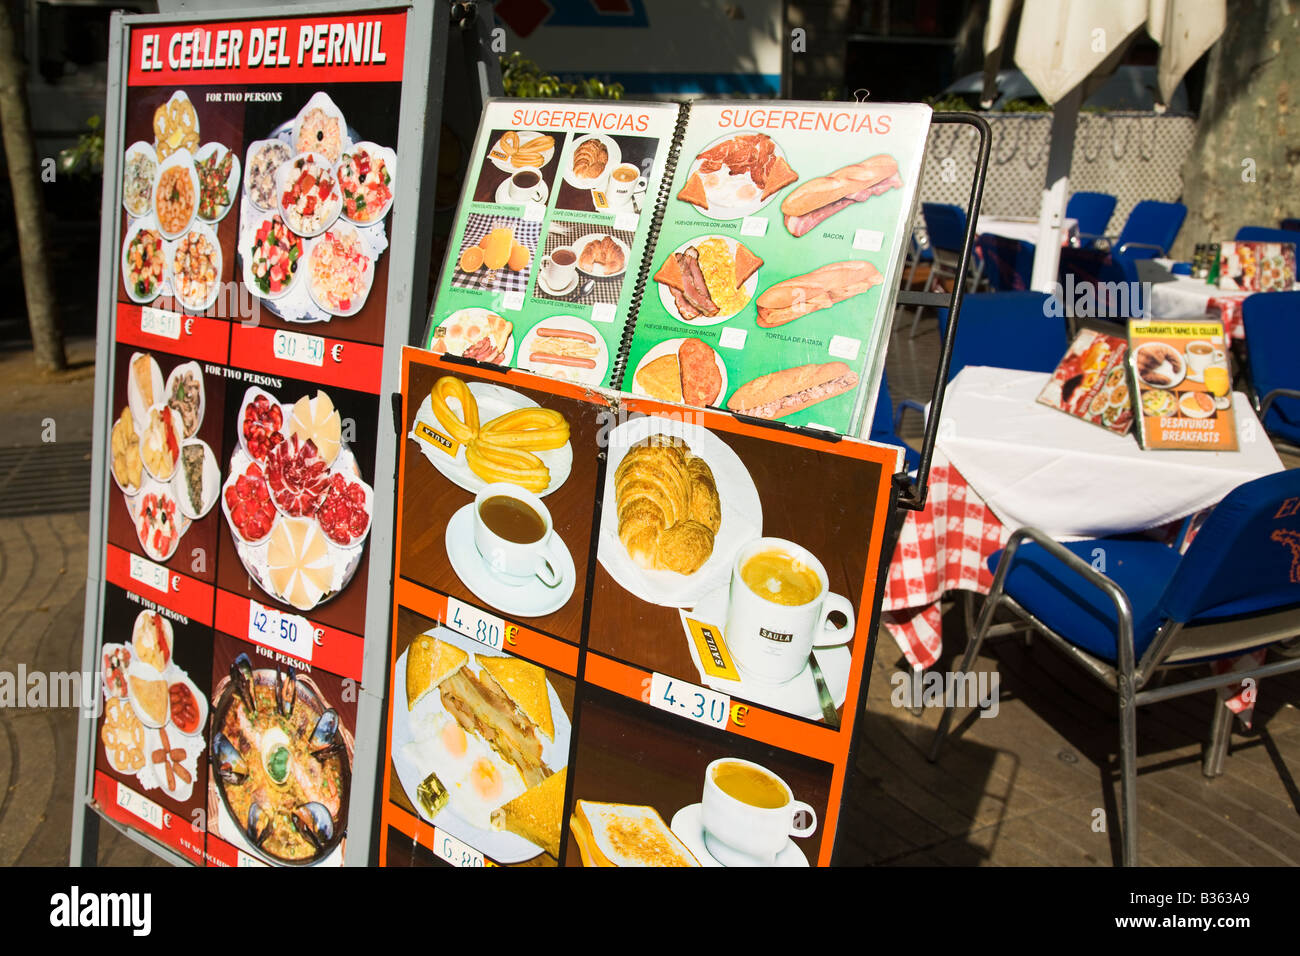 SPAIN Barcelona Large menus with photographs for food items available in English and Spanish languages Stock Photo